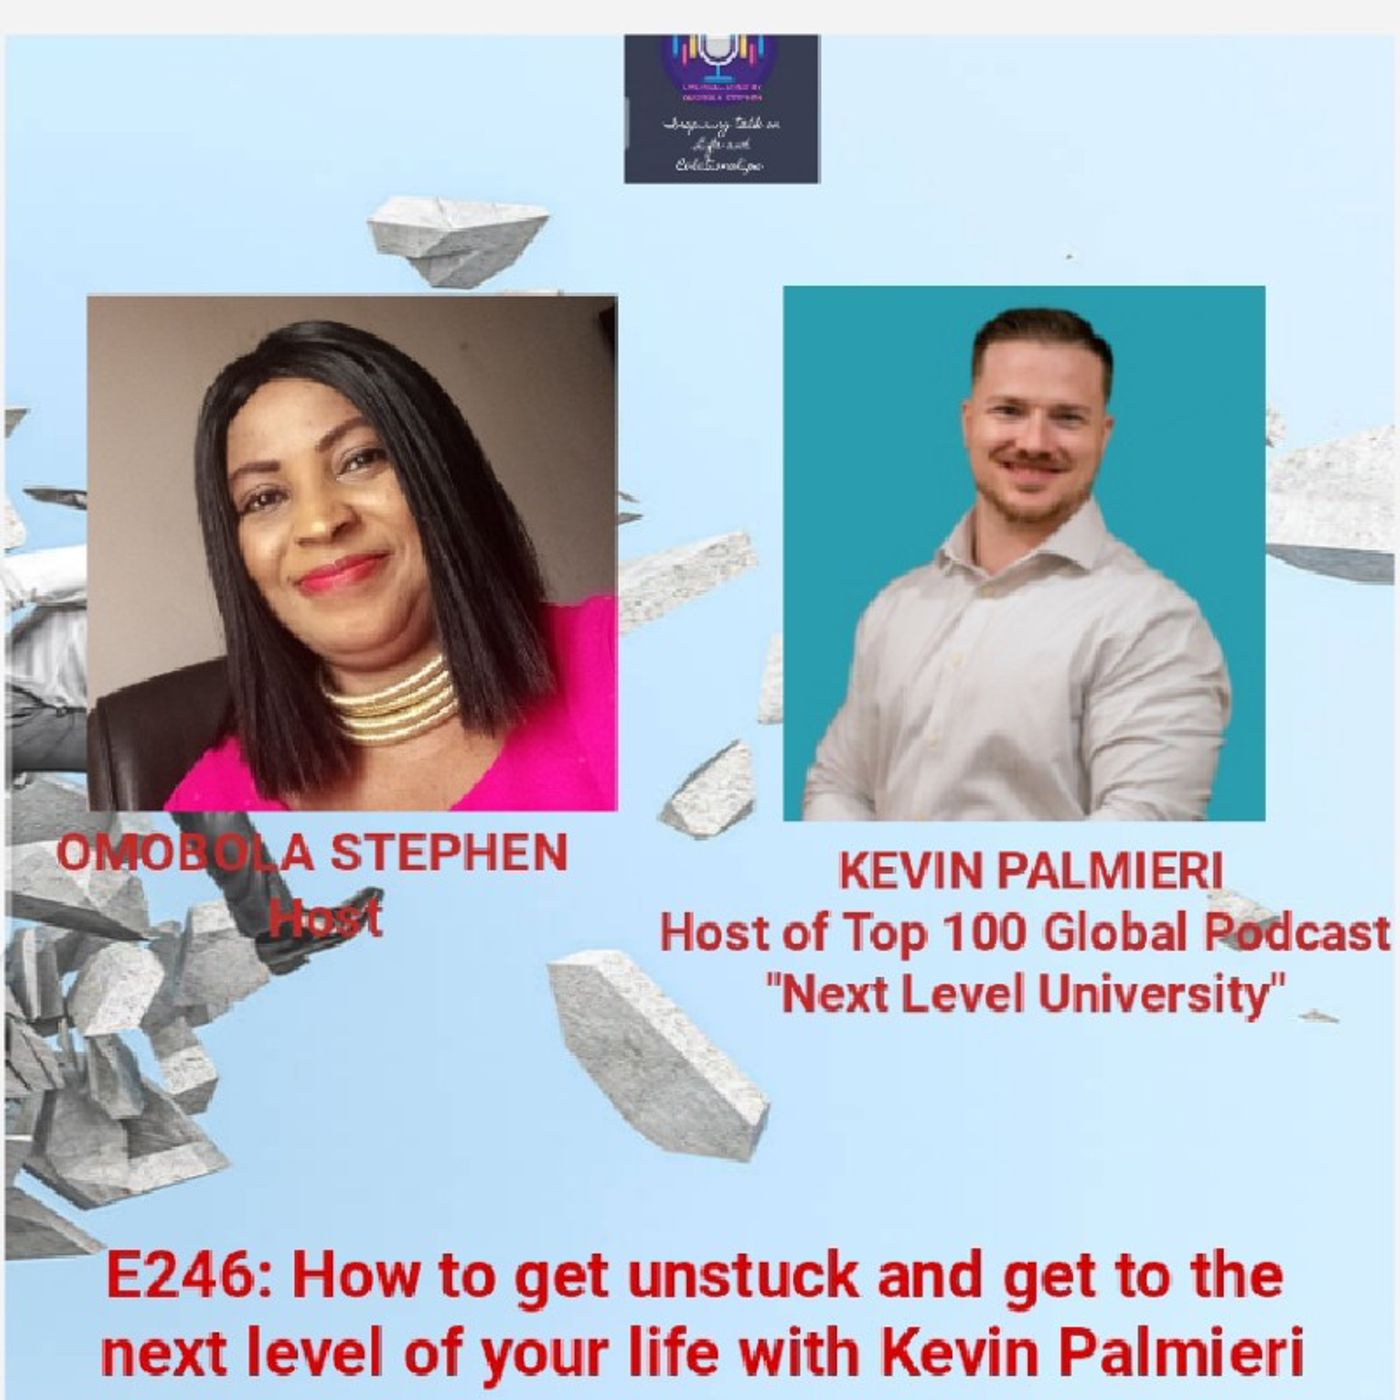 E246: How To Get Unstuck And Get To The Next Level Of Your Life With Kevin Palmieri